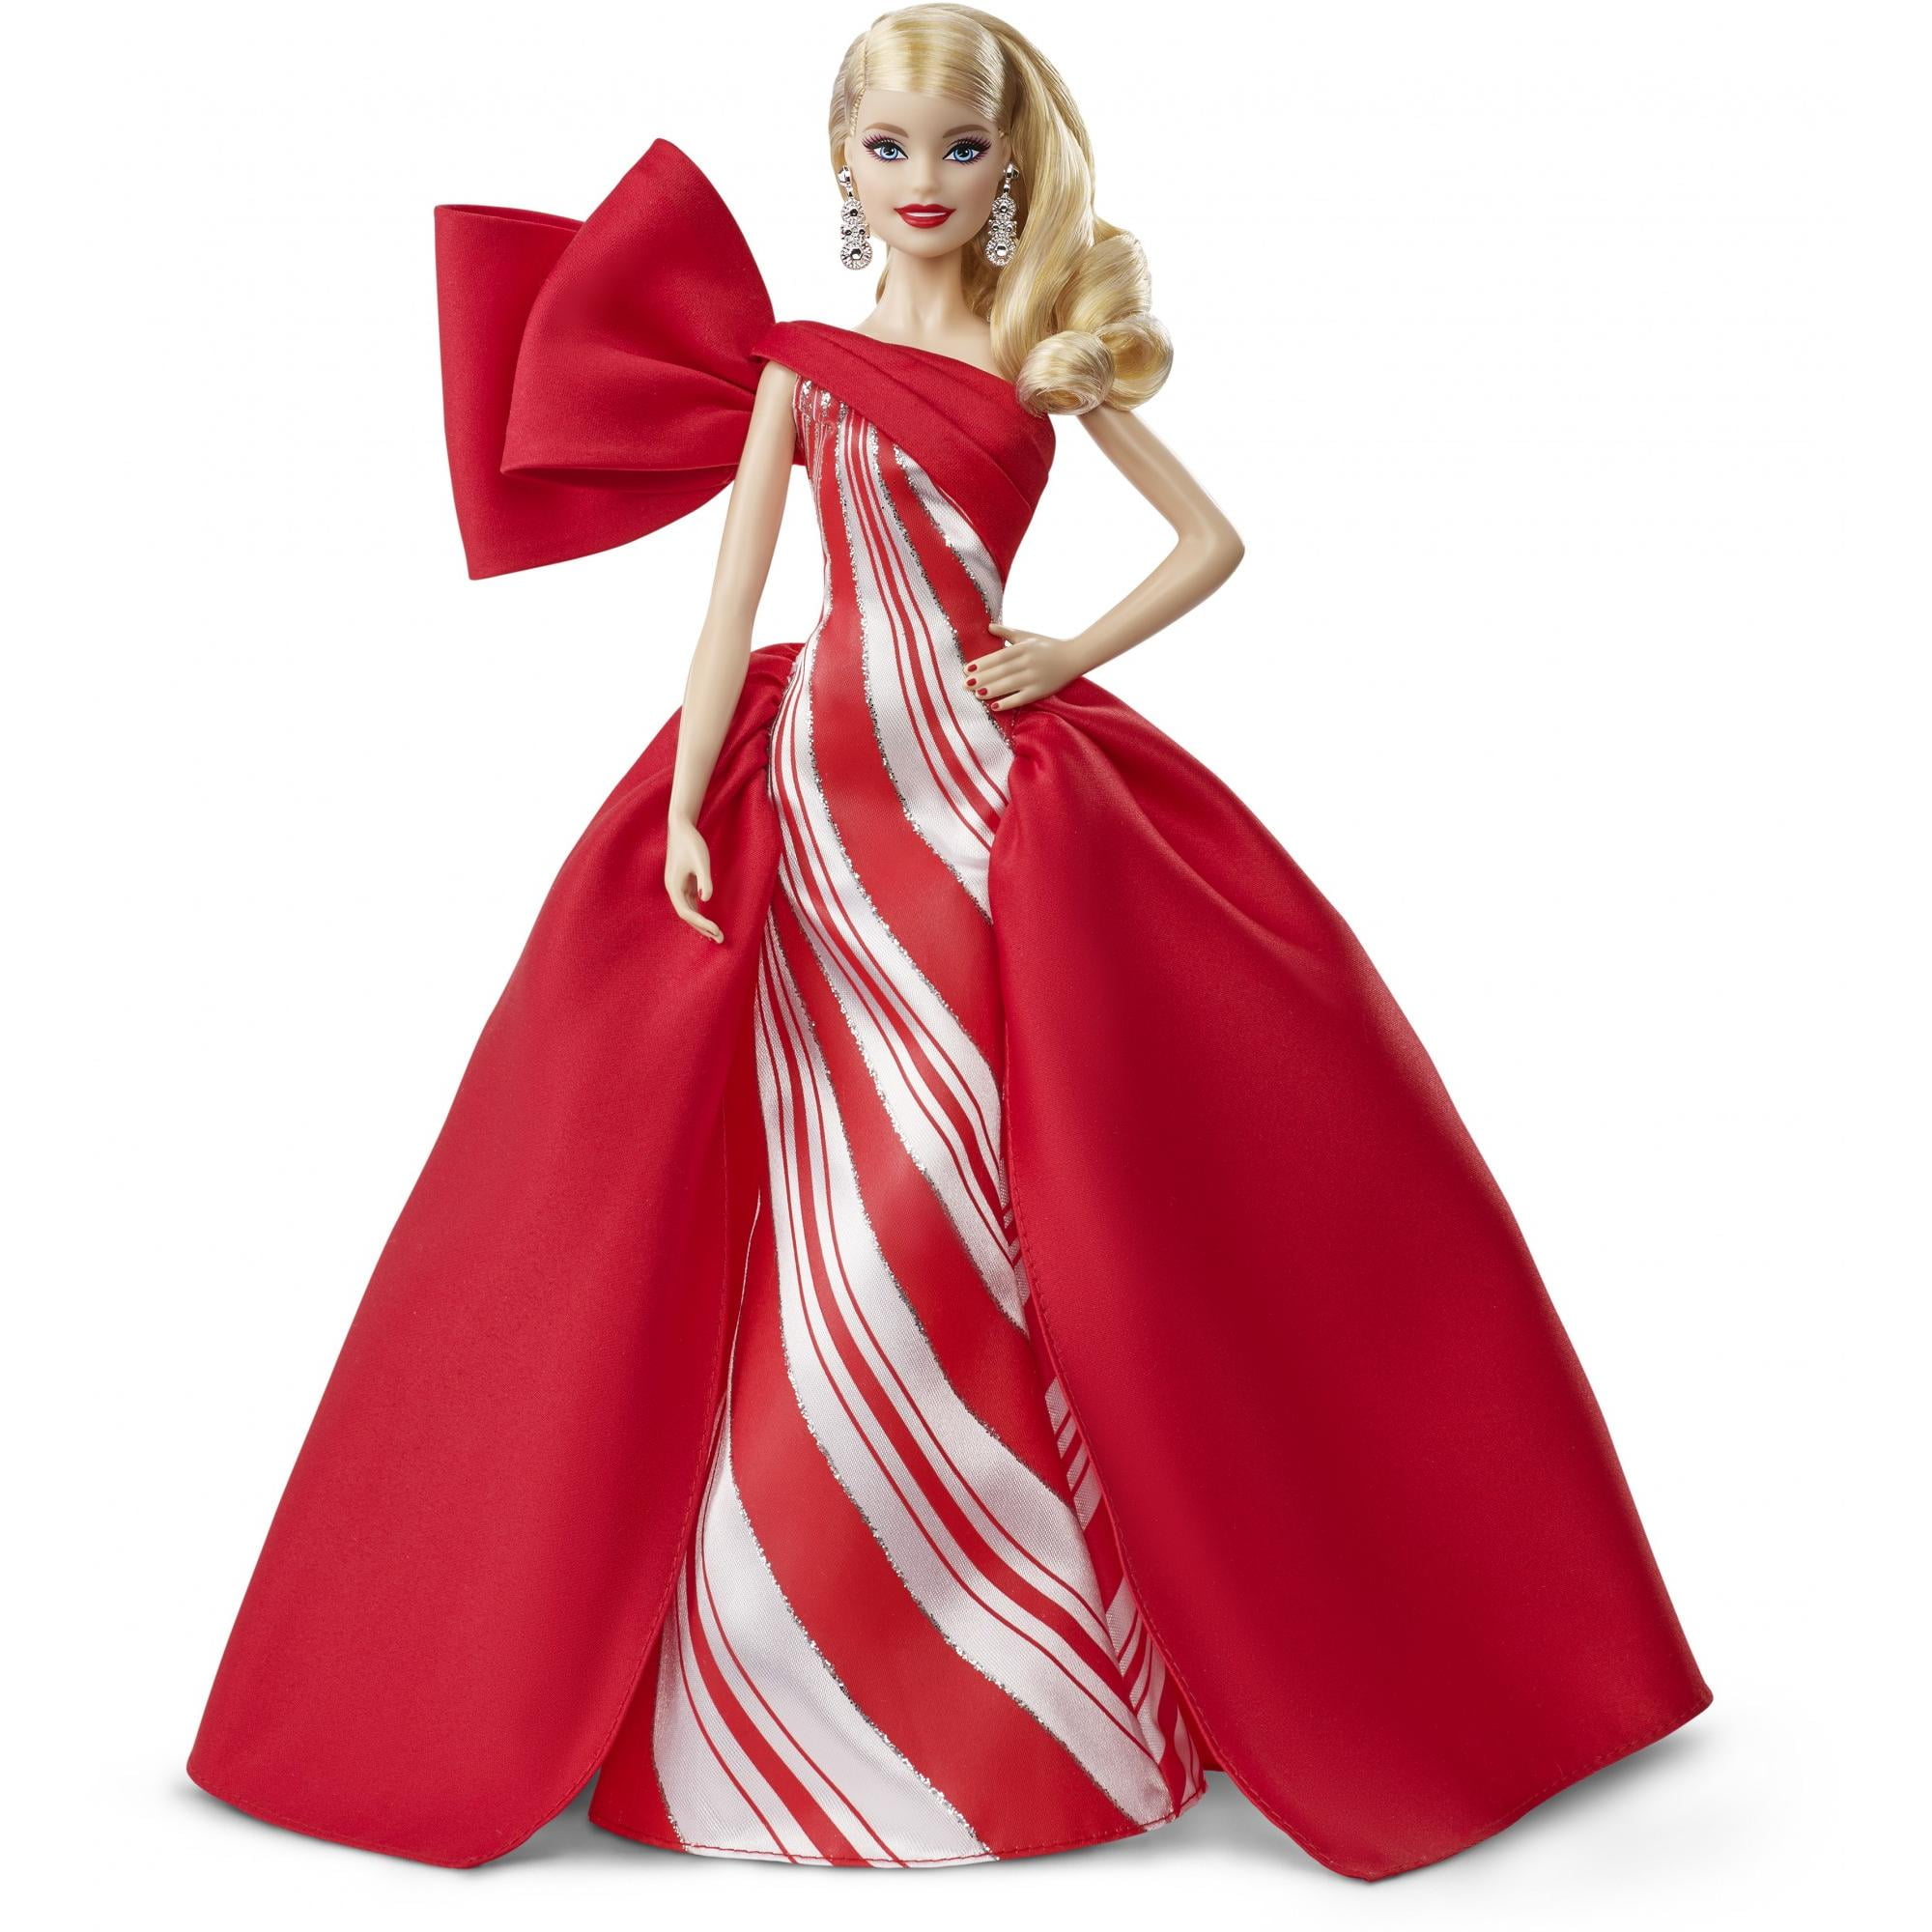 Barbie 2015 Birthday Wishes Barbie Doll (Discontinued by 